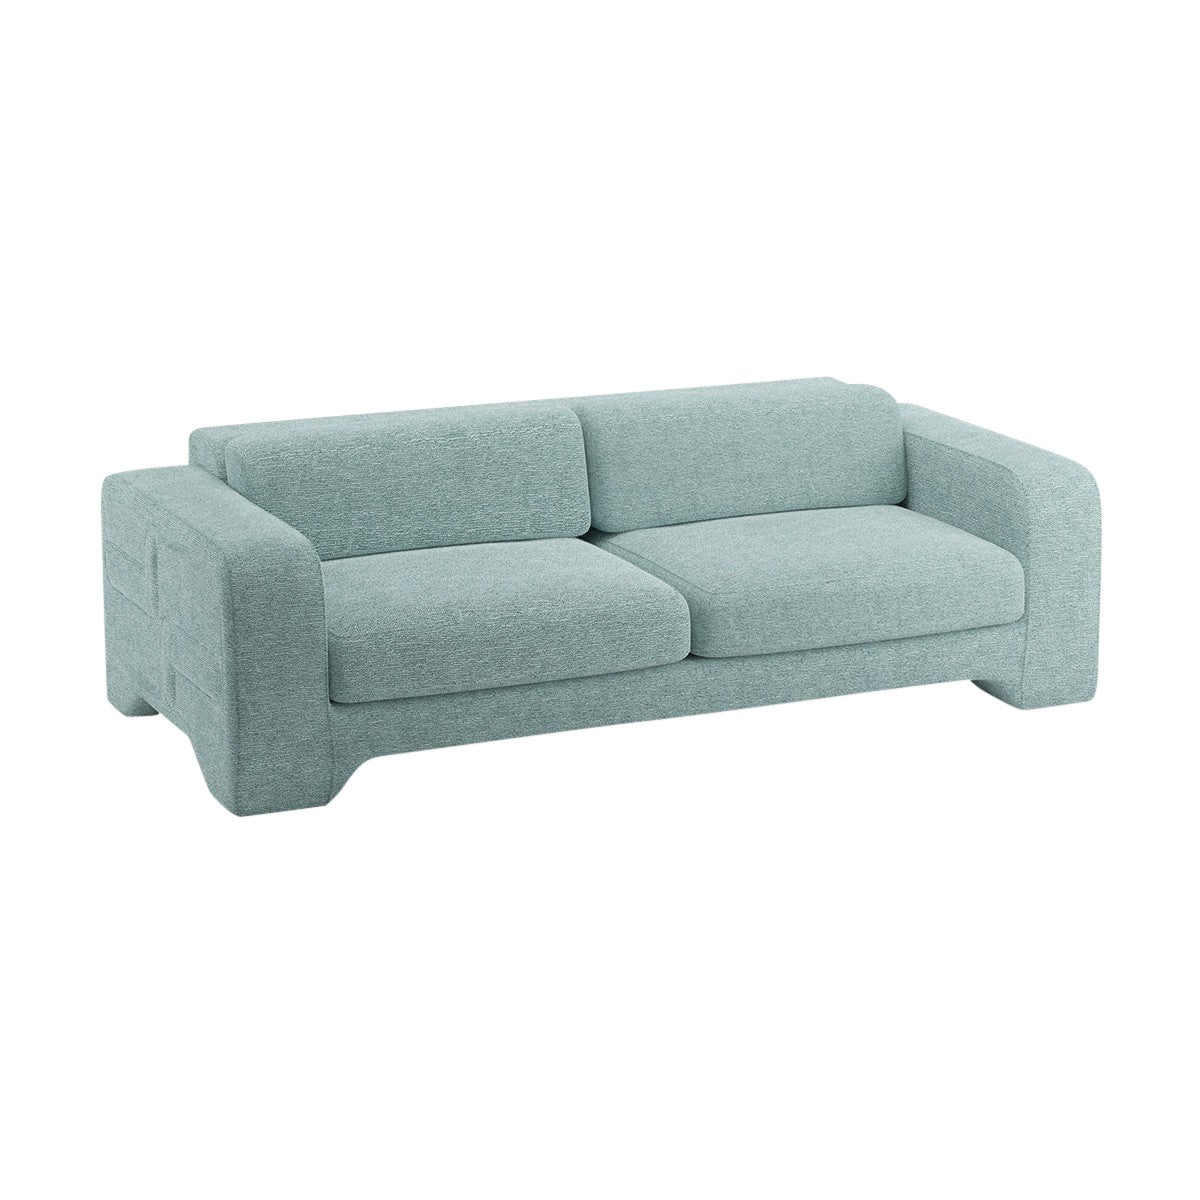 Popus Editions Giovanna 2.5 Seater Sofa in Mint Megeve Fabric with a Knit Effect For Sale